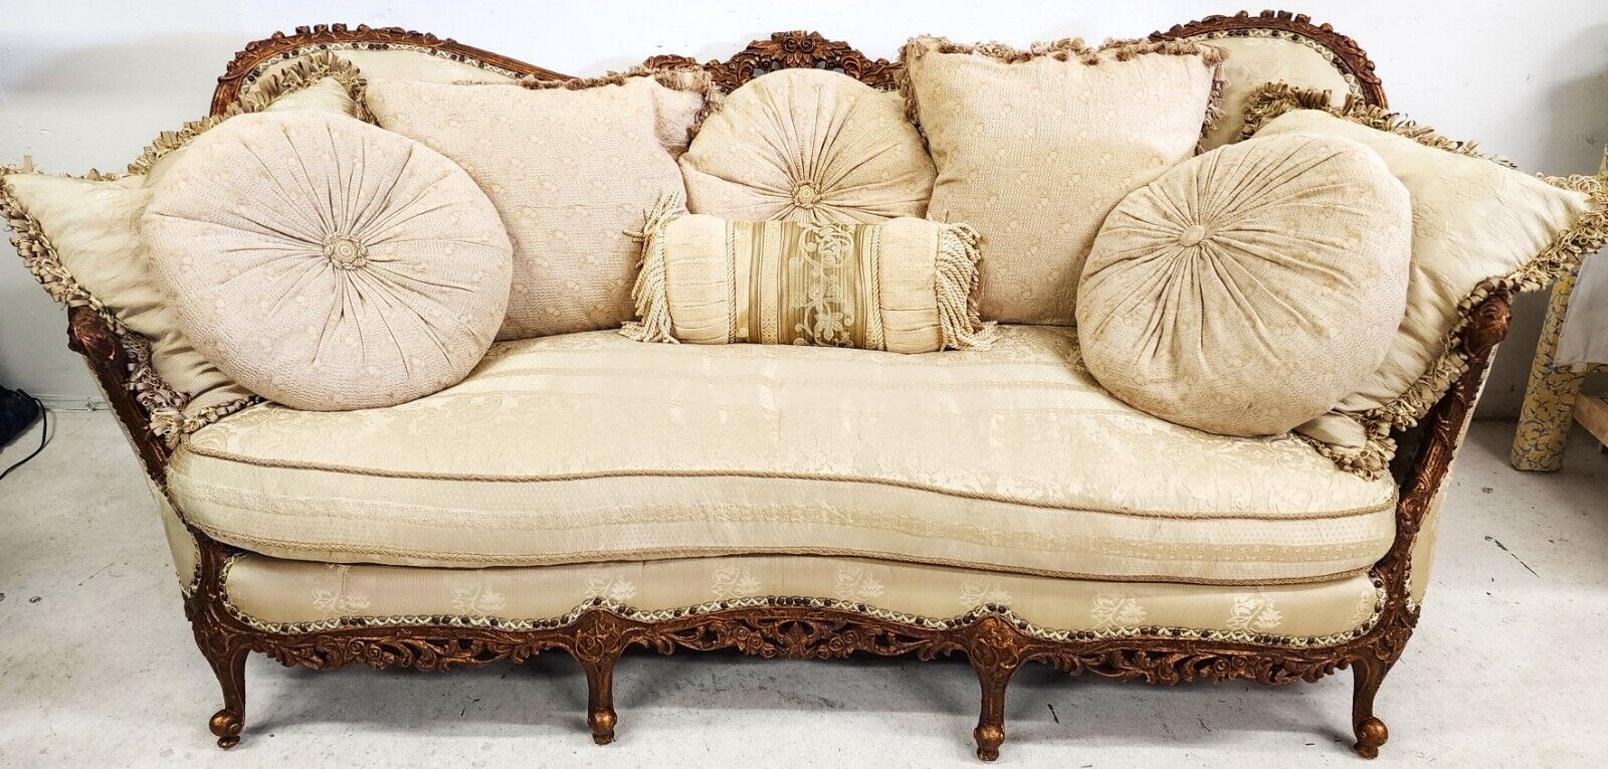 Offering One Of Our Recent Palm Beach Estate Fine Furniture Acquisitions Of A 
Really Stunning Vintage Sofa Carved Walnut Gilt by CAROL HICKS BOLTON for EJ VICTOR
Includes the original matching throw pillows from Carol Hicks Bolton.

Wonderful